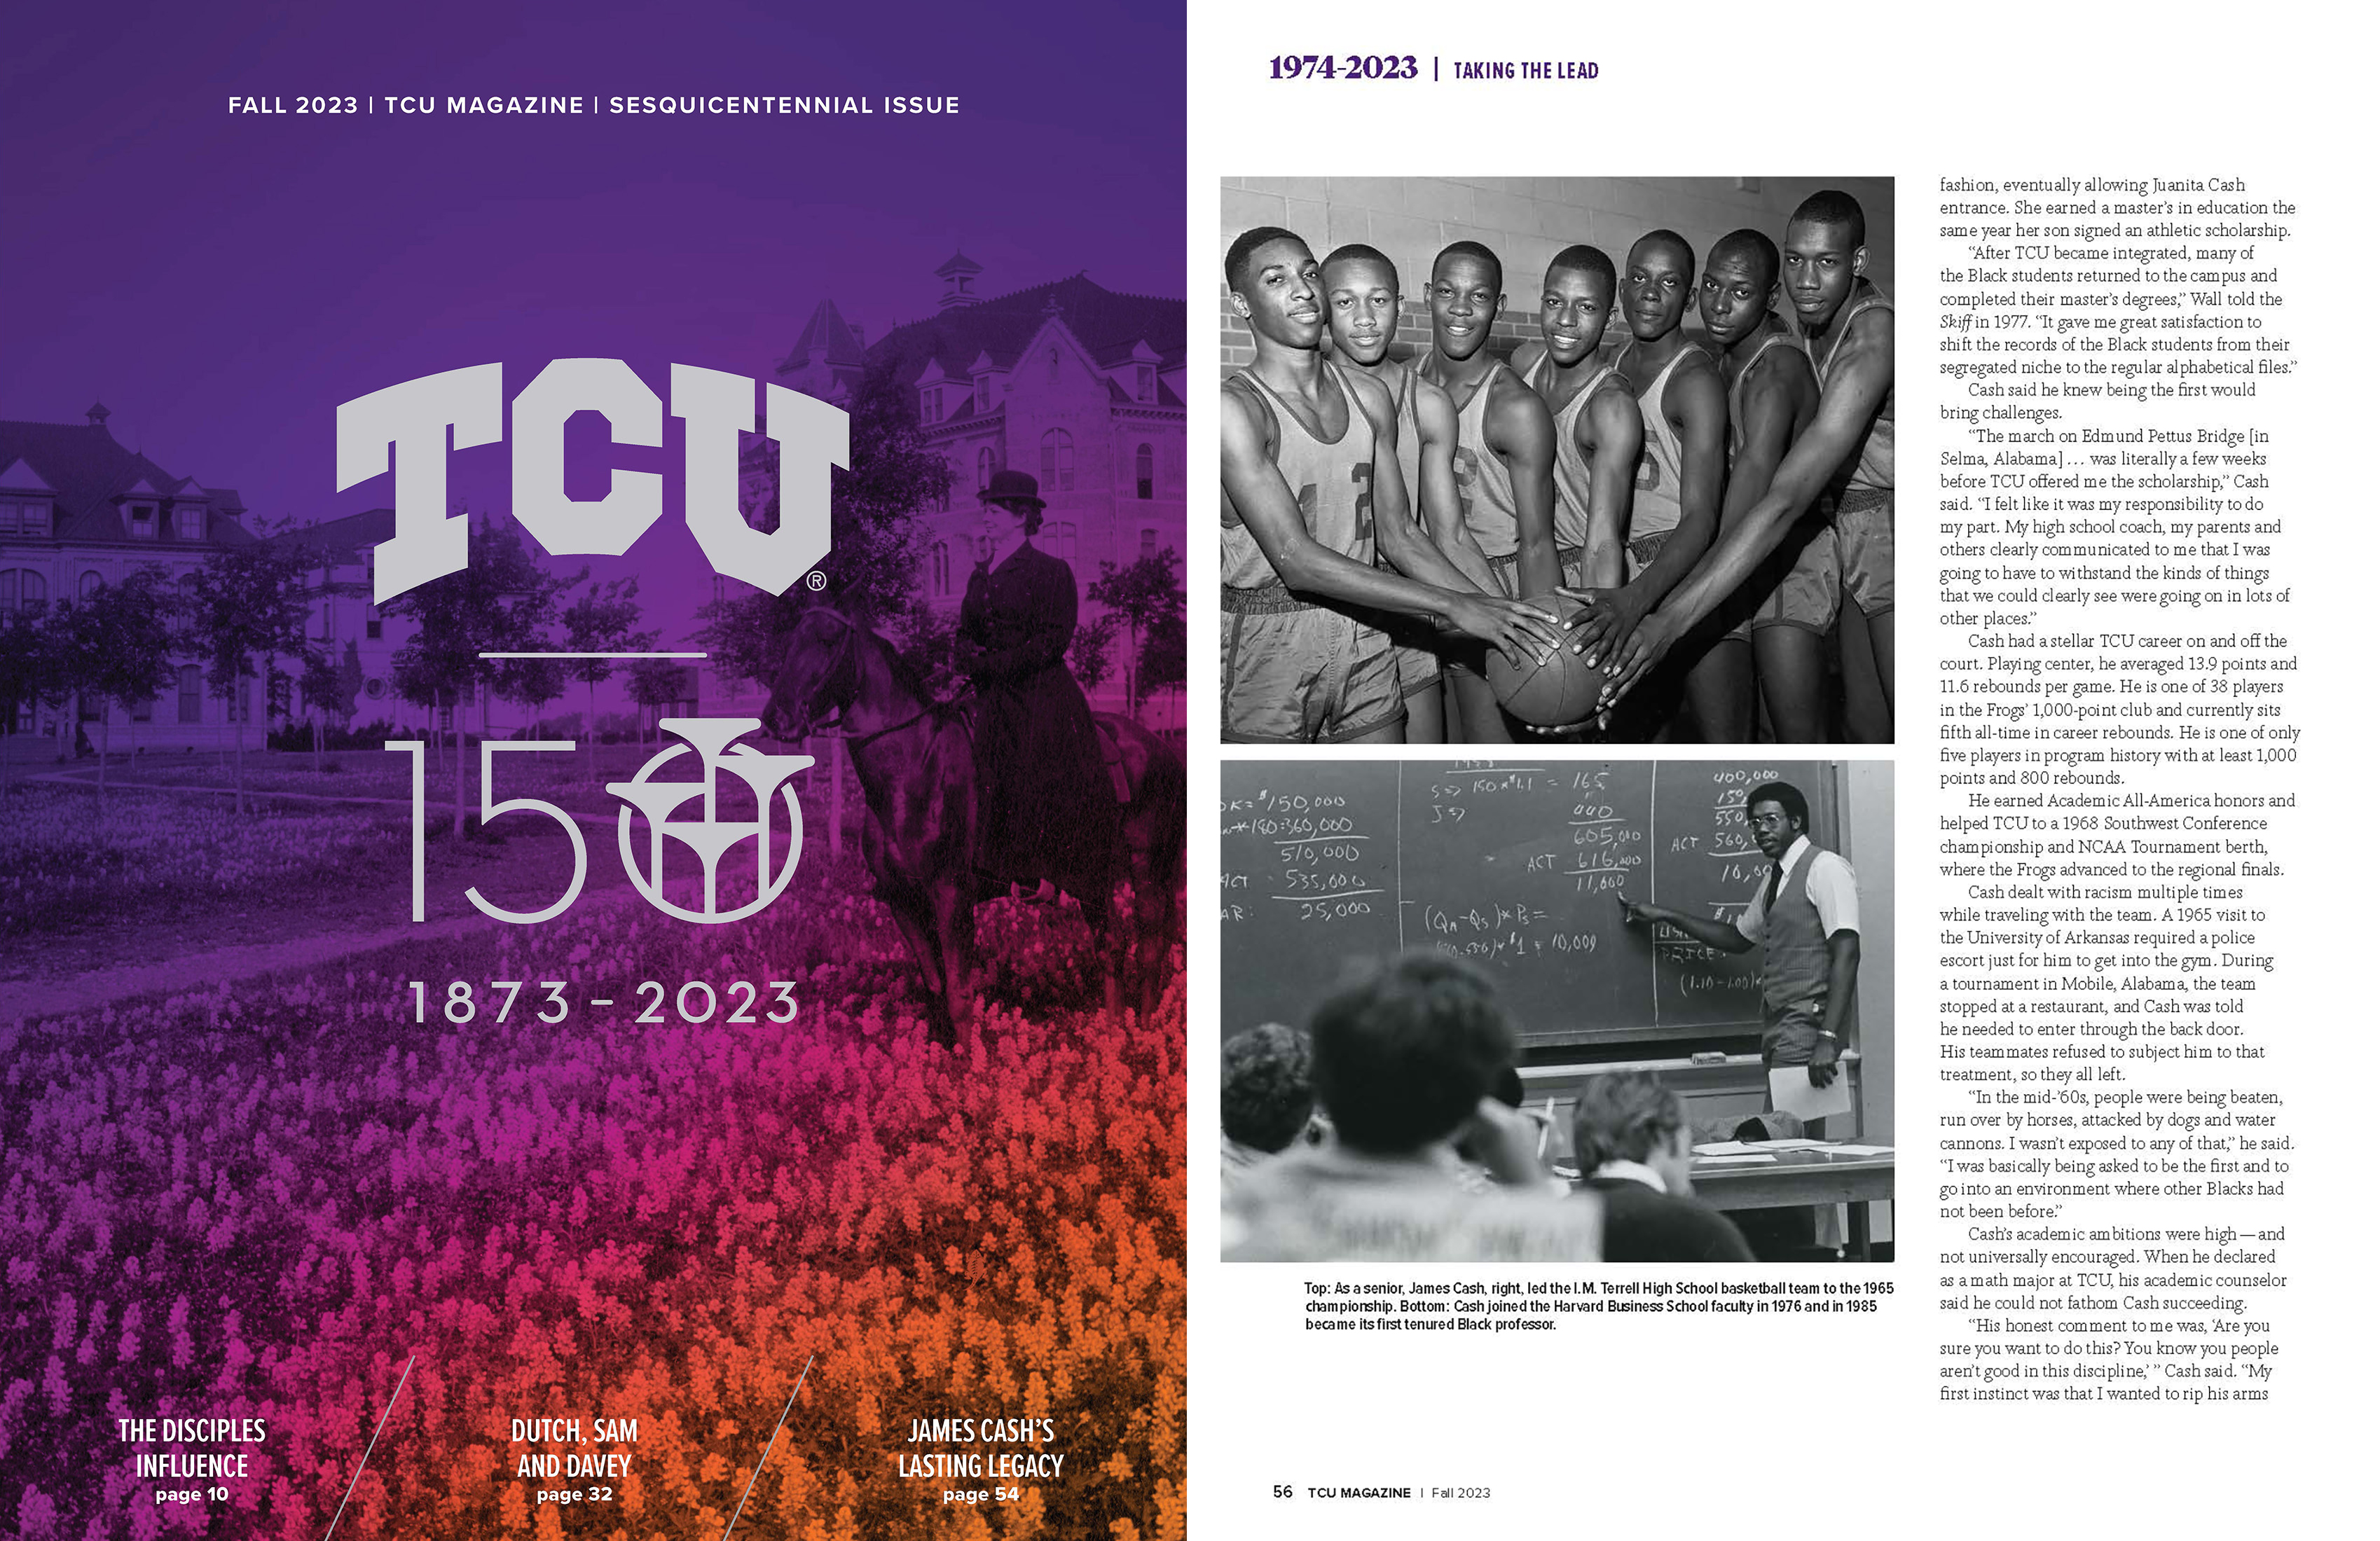 Cover image of TCU Magazine Fall 2023 issue at left, and an article about James Cash at right with photos and text.